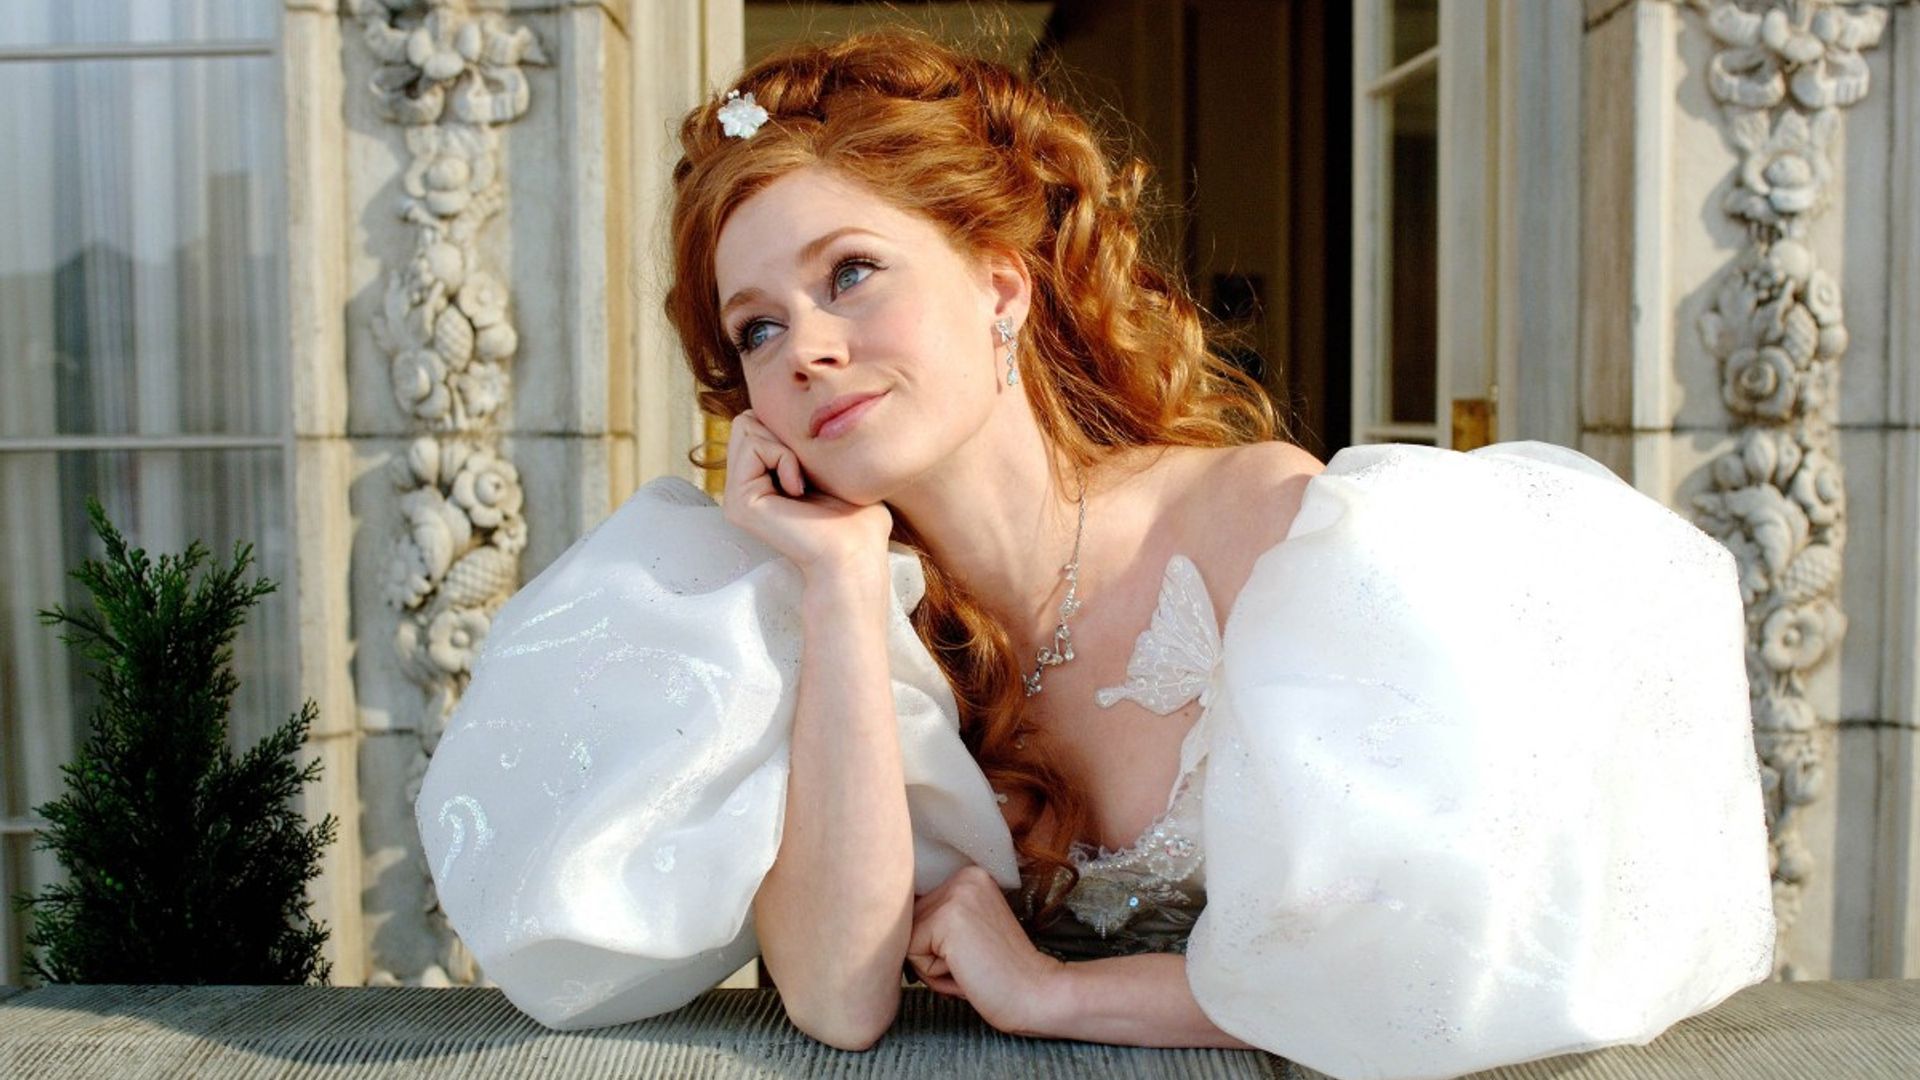 Enchanted sequel has started filming - details 